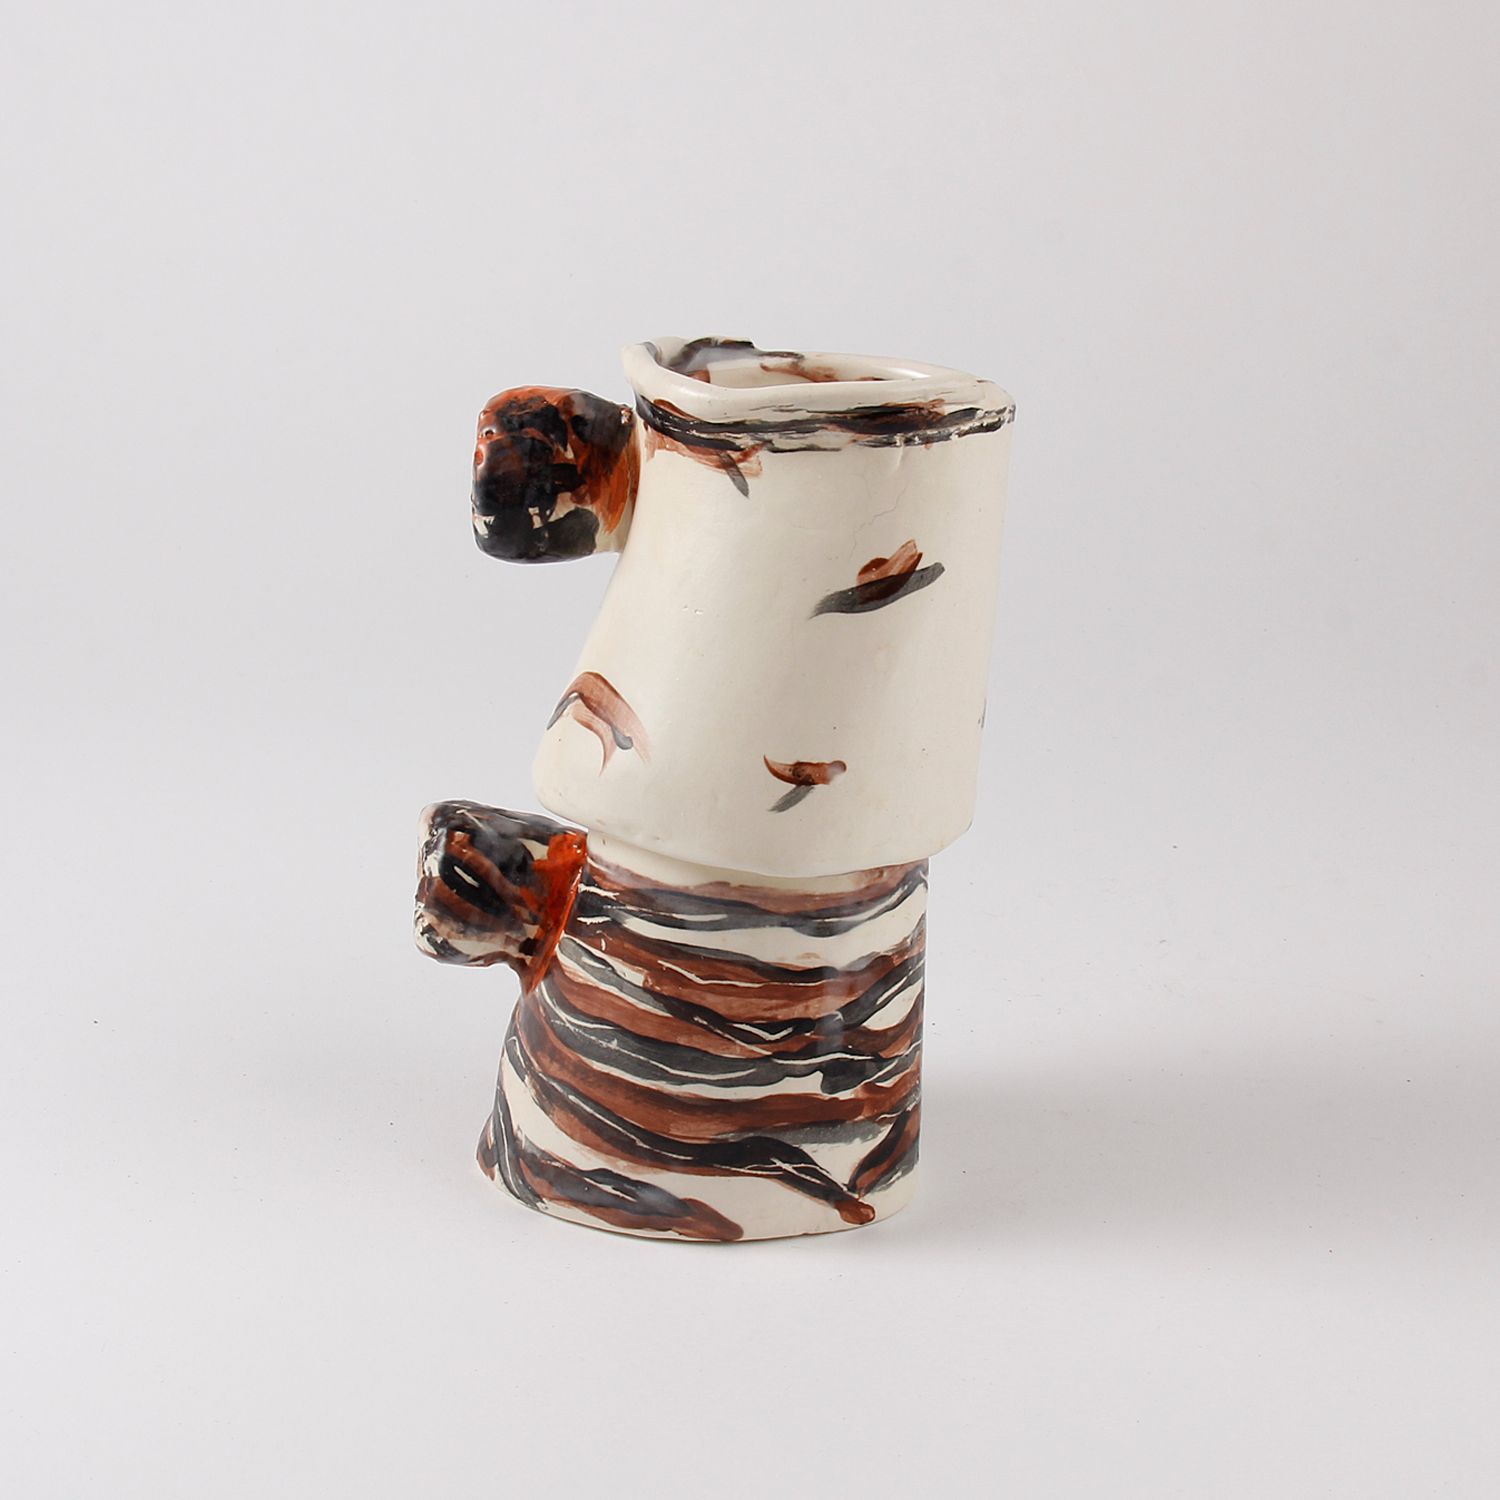 Patricia Lazar: Tall Vessel Product Image 2 of 2